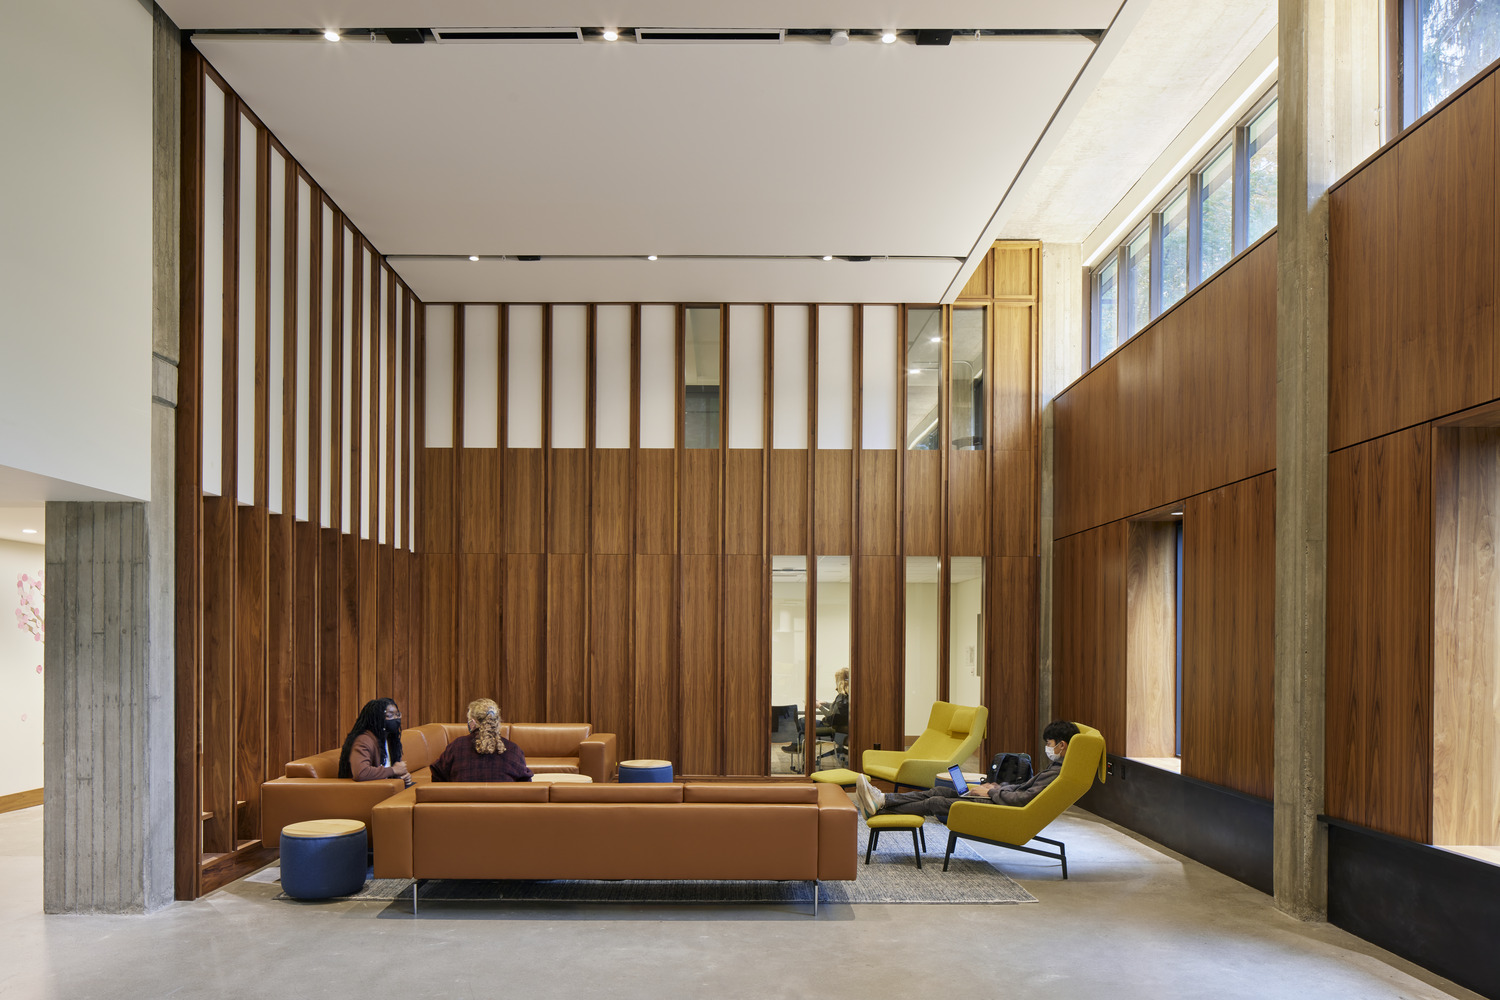 <p>The McCarty Hall community lounge serves as a living room for all students in the building. The double height space creates a sense of openness while providing shared student space, meeting rooms, and a group kitchen. | <small>&copy; Bruce Damonte</small></p>